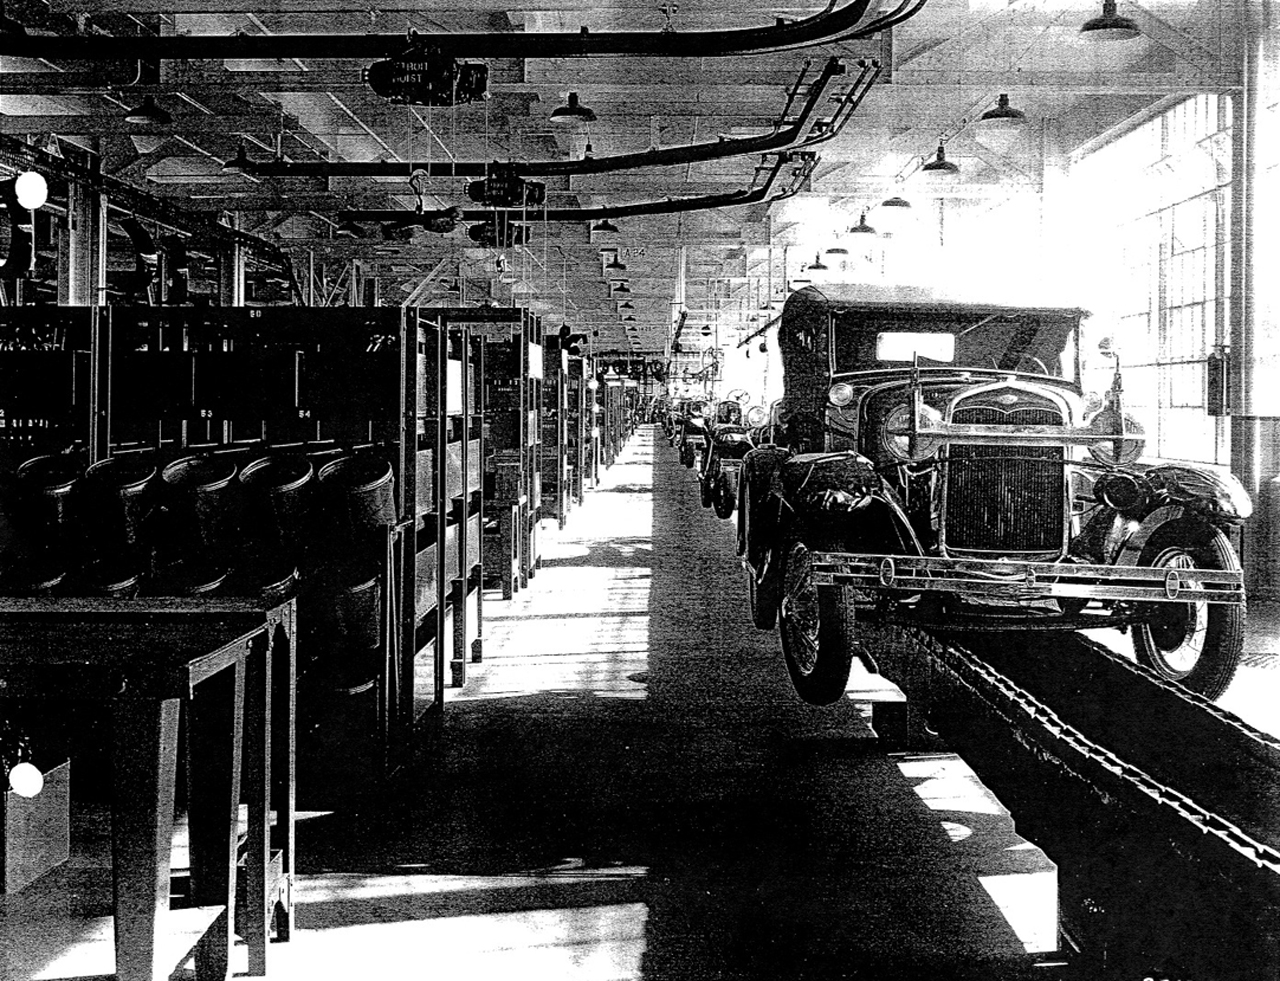 Ford model t and the assembly line in the 1920s